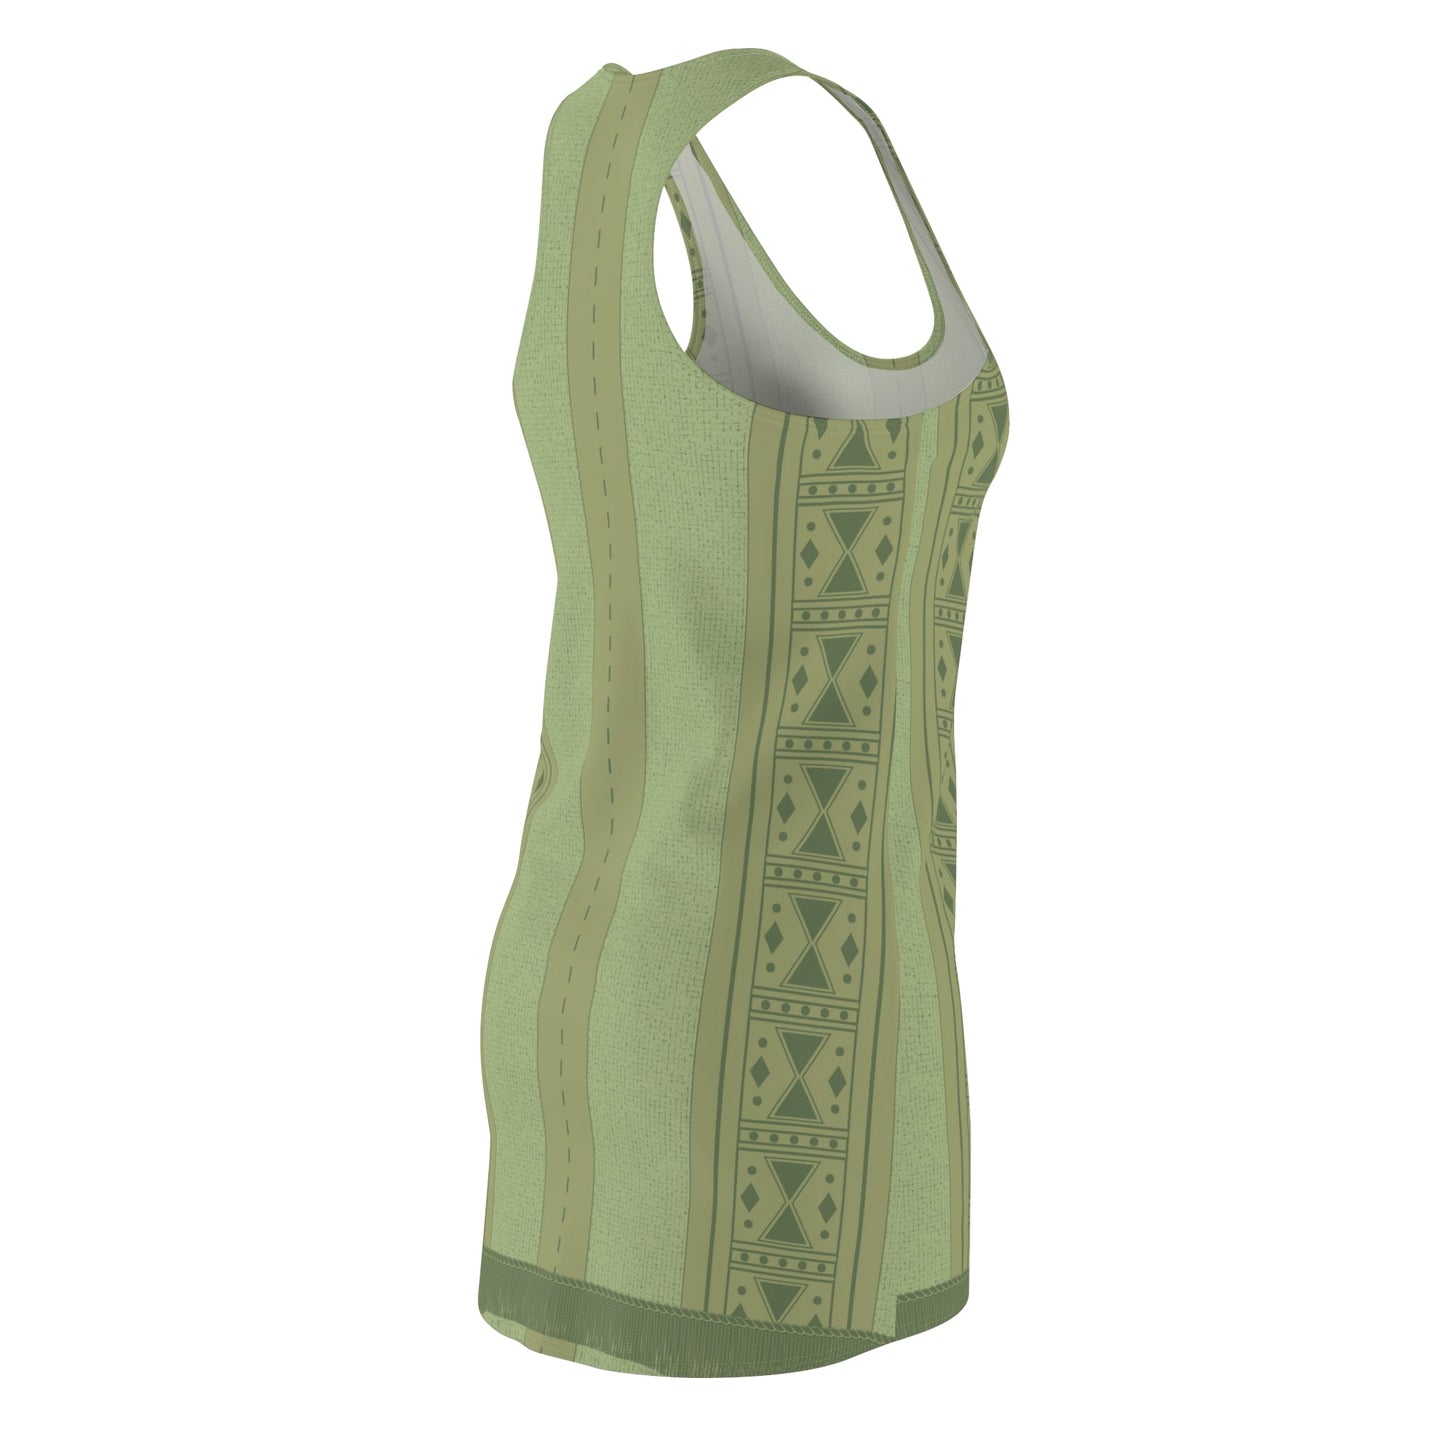 The Bruno Women's Cut & Sew Racerback Dress All Over PrintAOPAOP Clothing#tag4##tag5##tag6#